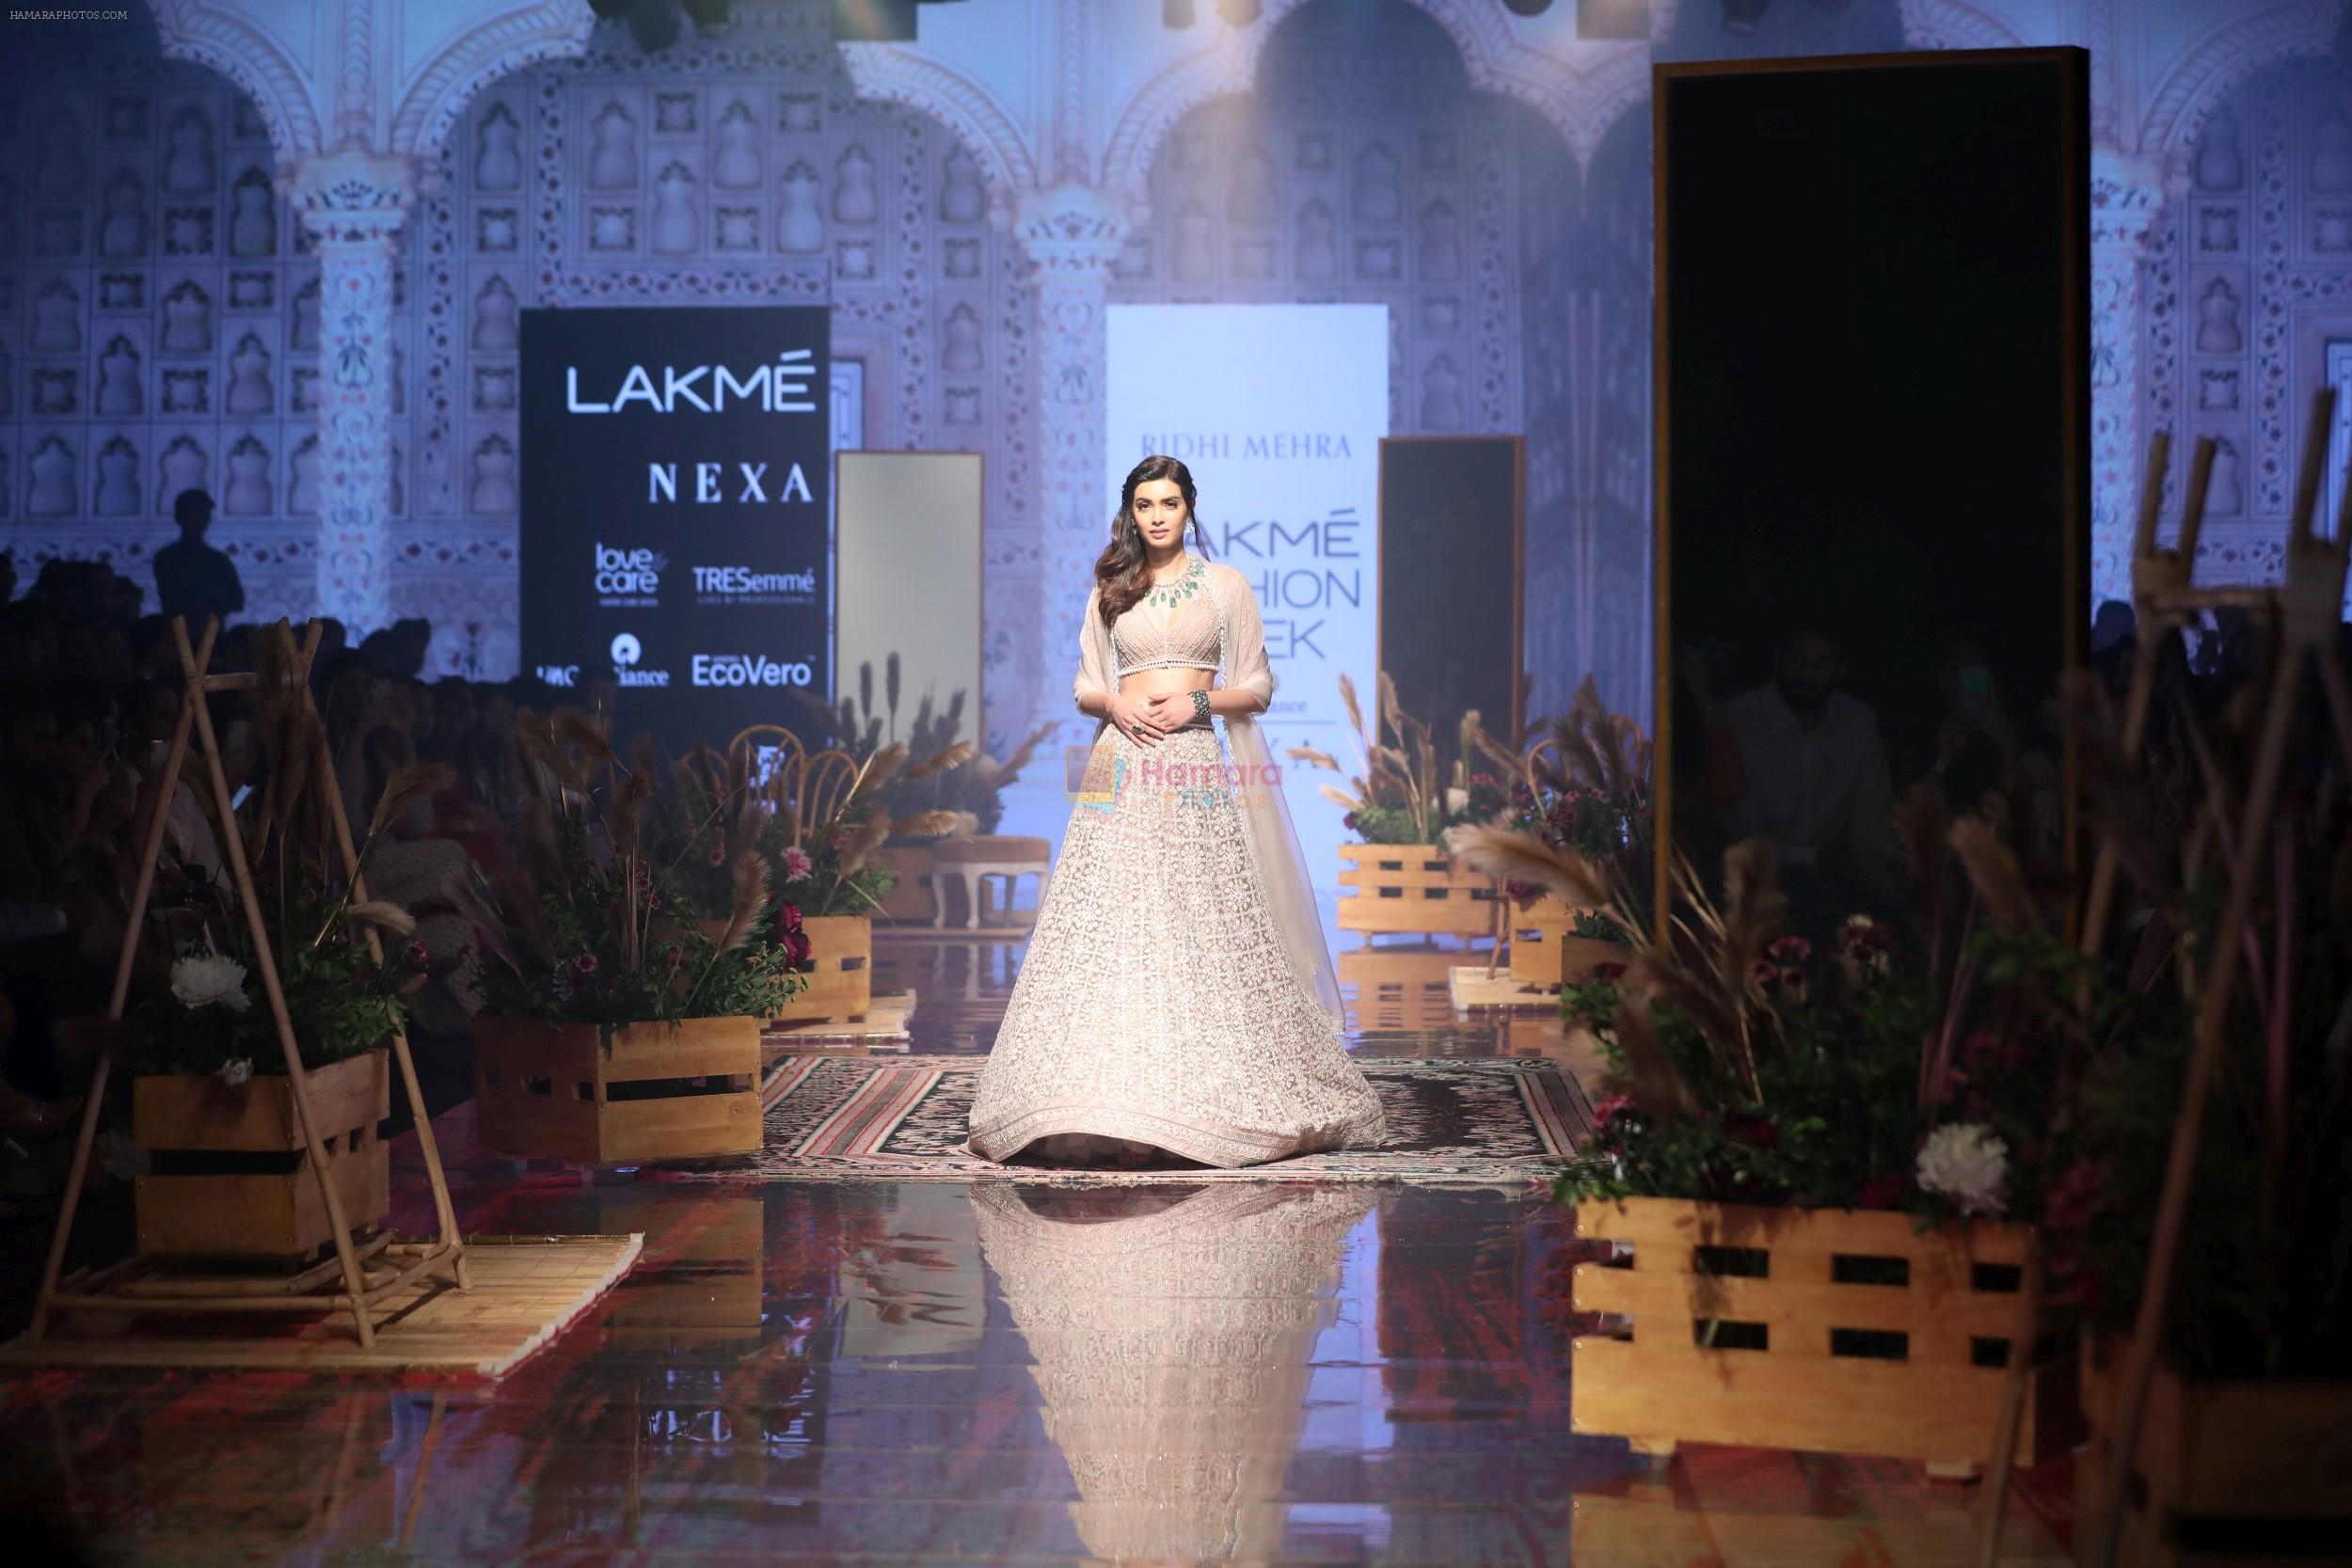 Diana Penty At Lakme Fashion Show Day 3 on 23rd Aug 2019